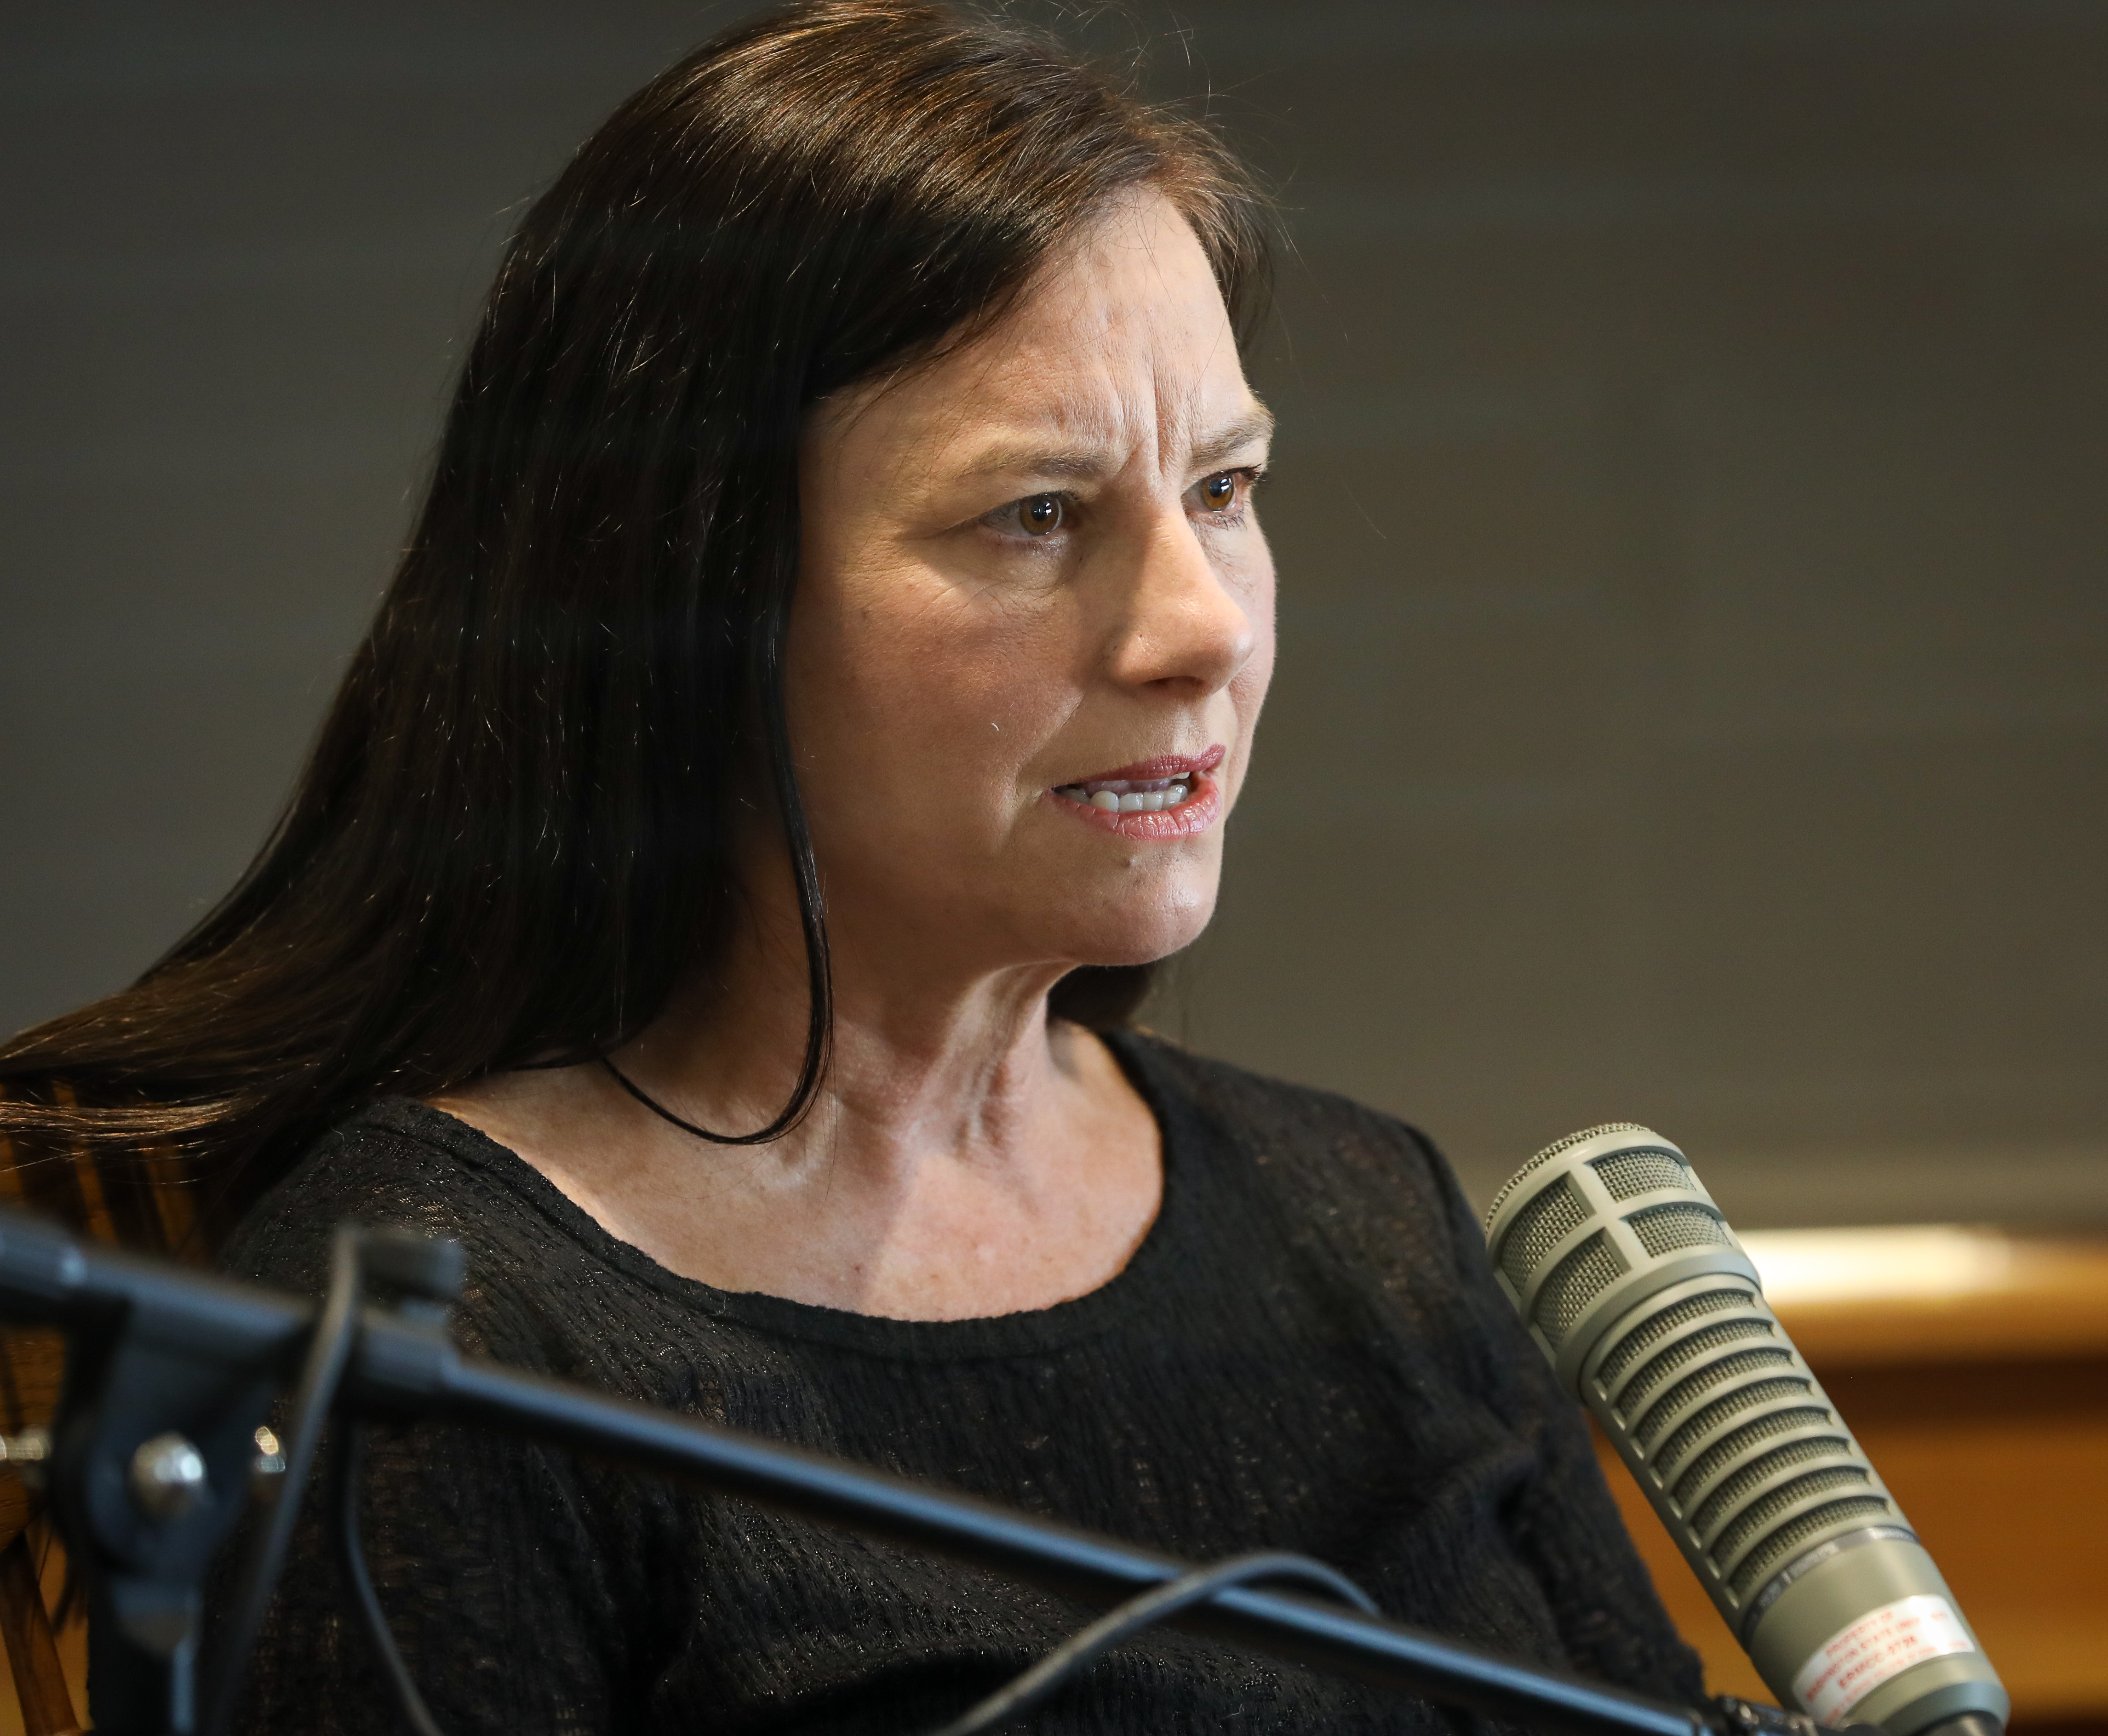 In this photo, Sarah Zabel displays a focused and serious look as she speaks into a microphone.